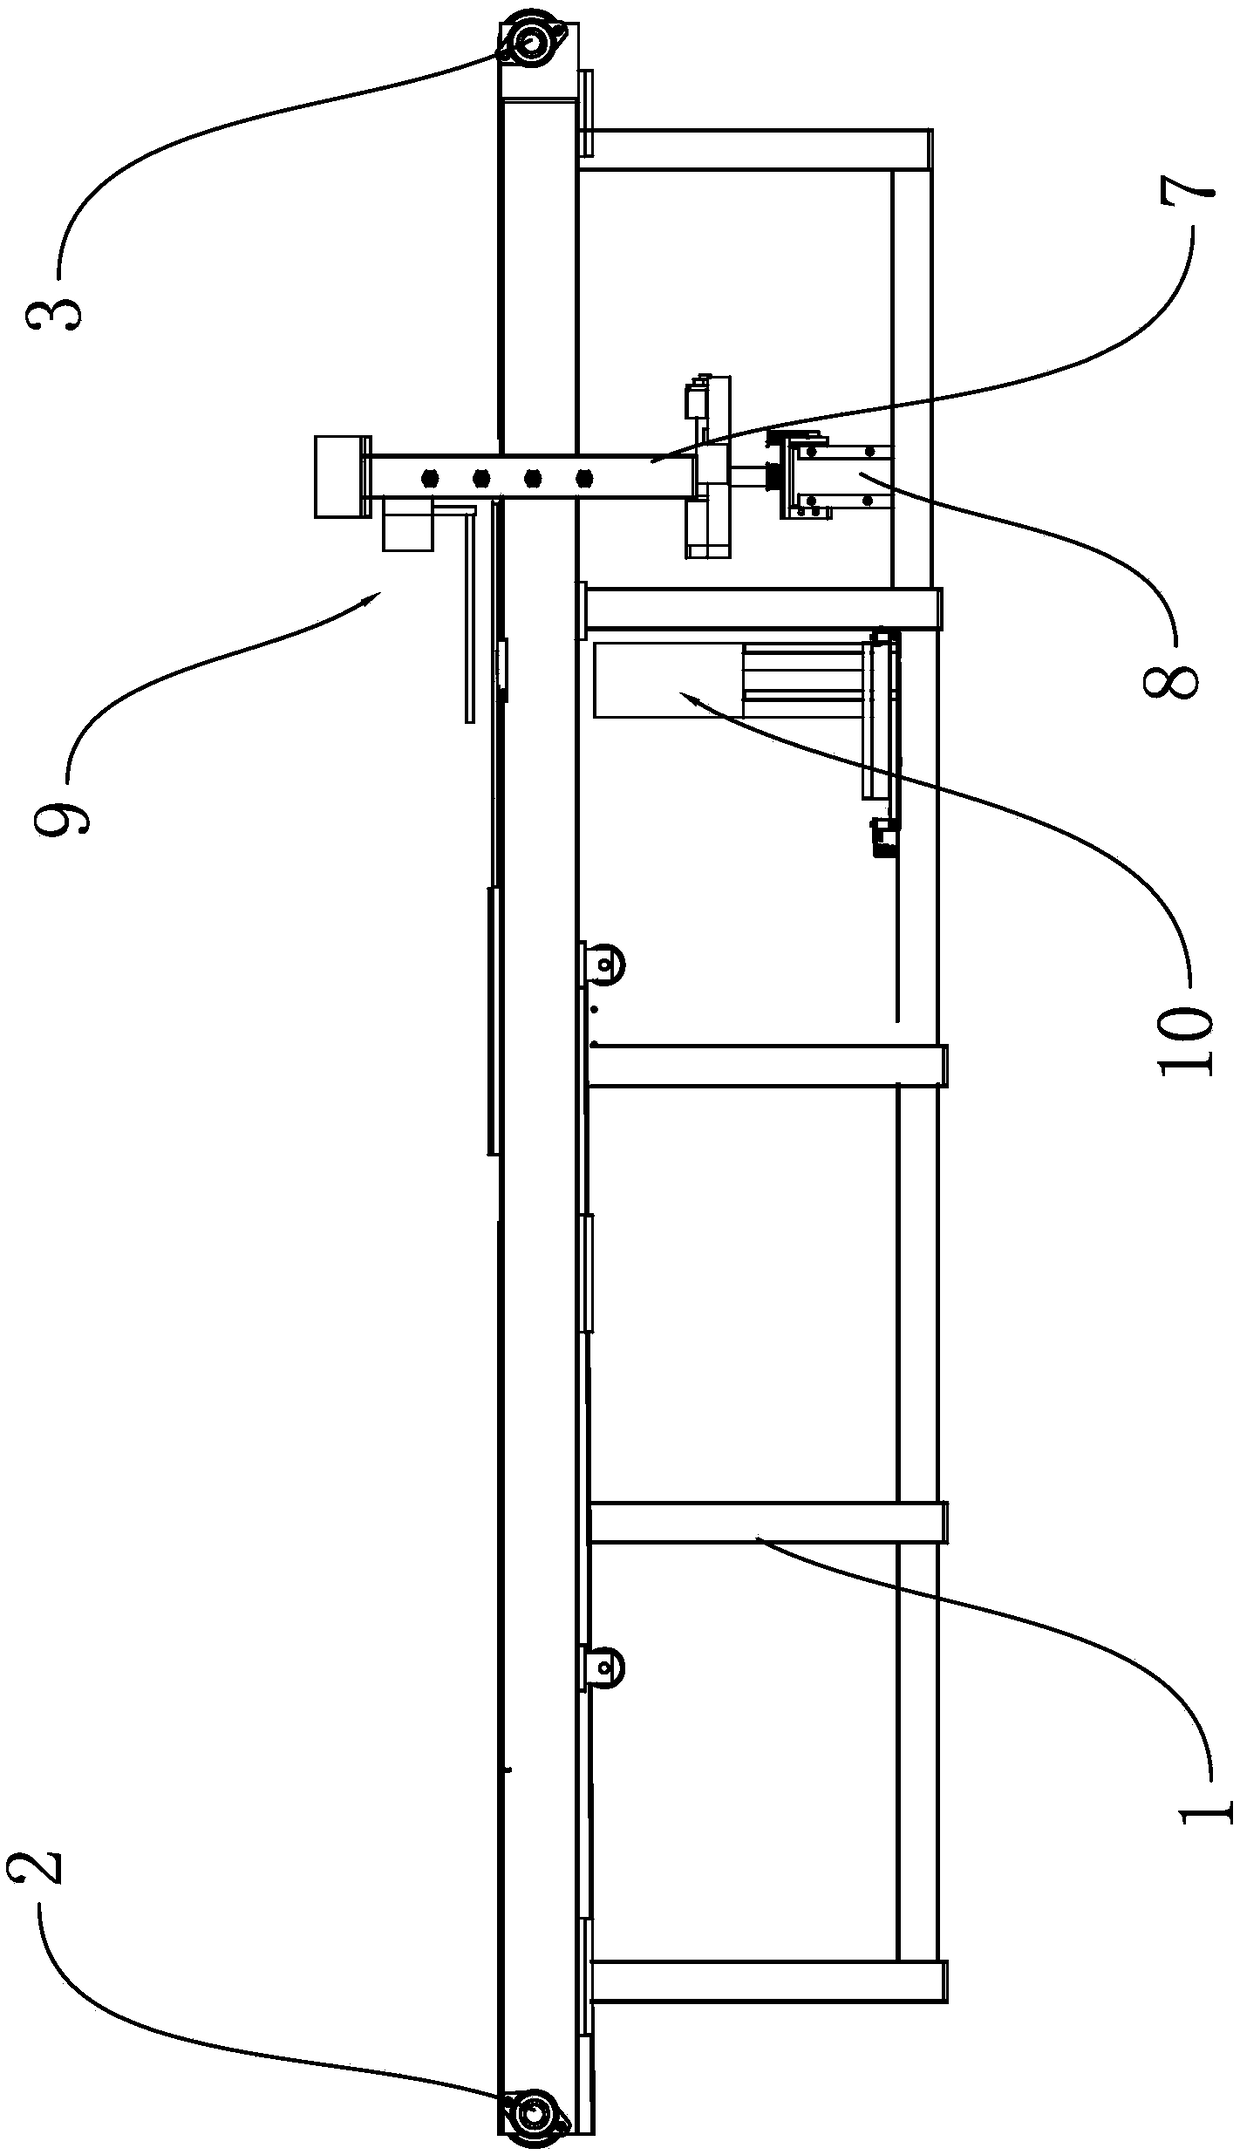 Automatic stocking winding structure for stocking packaging